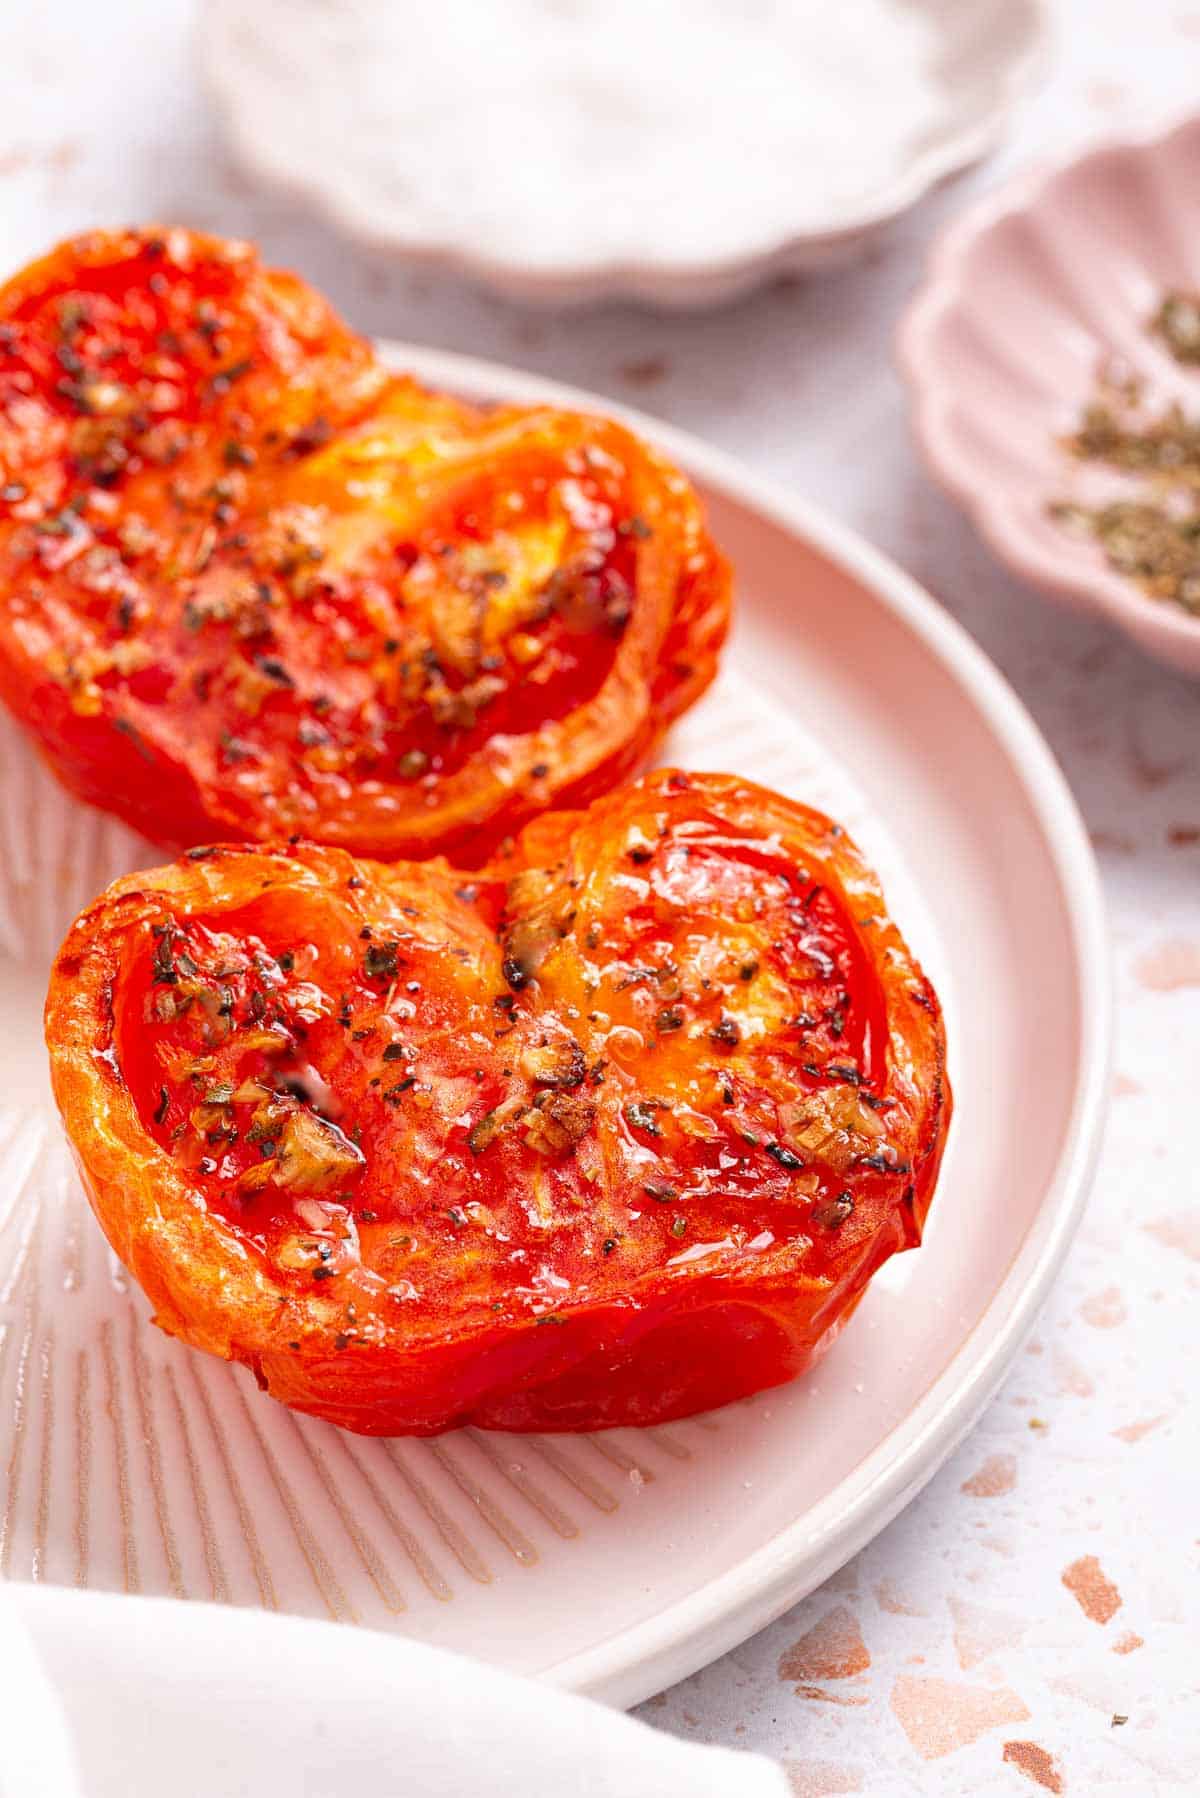 Two roasted tomatoes on a plate.